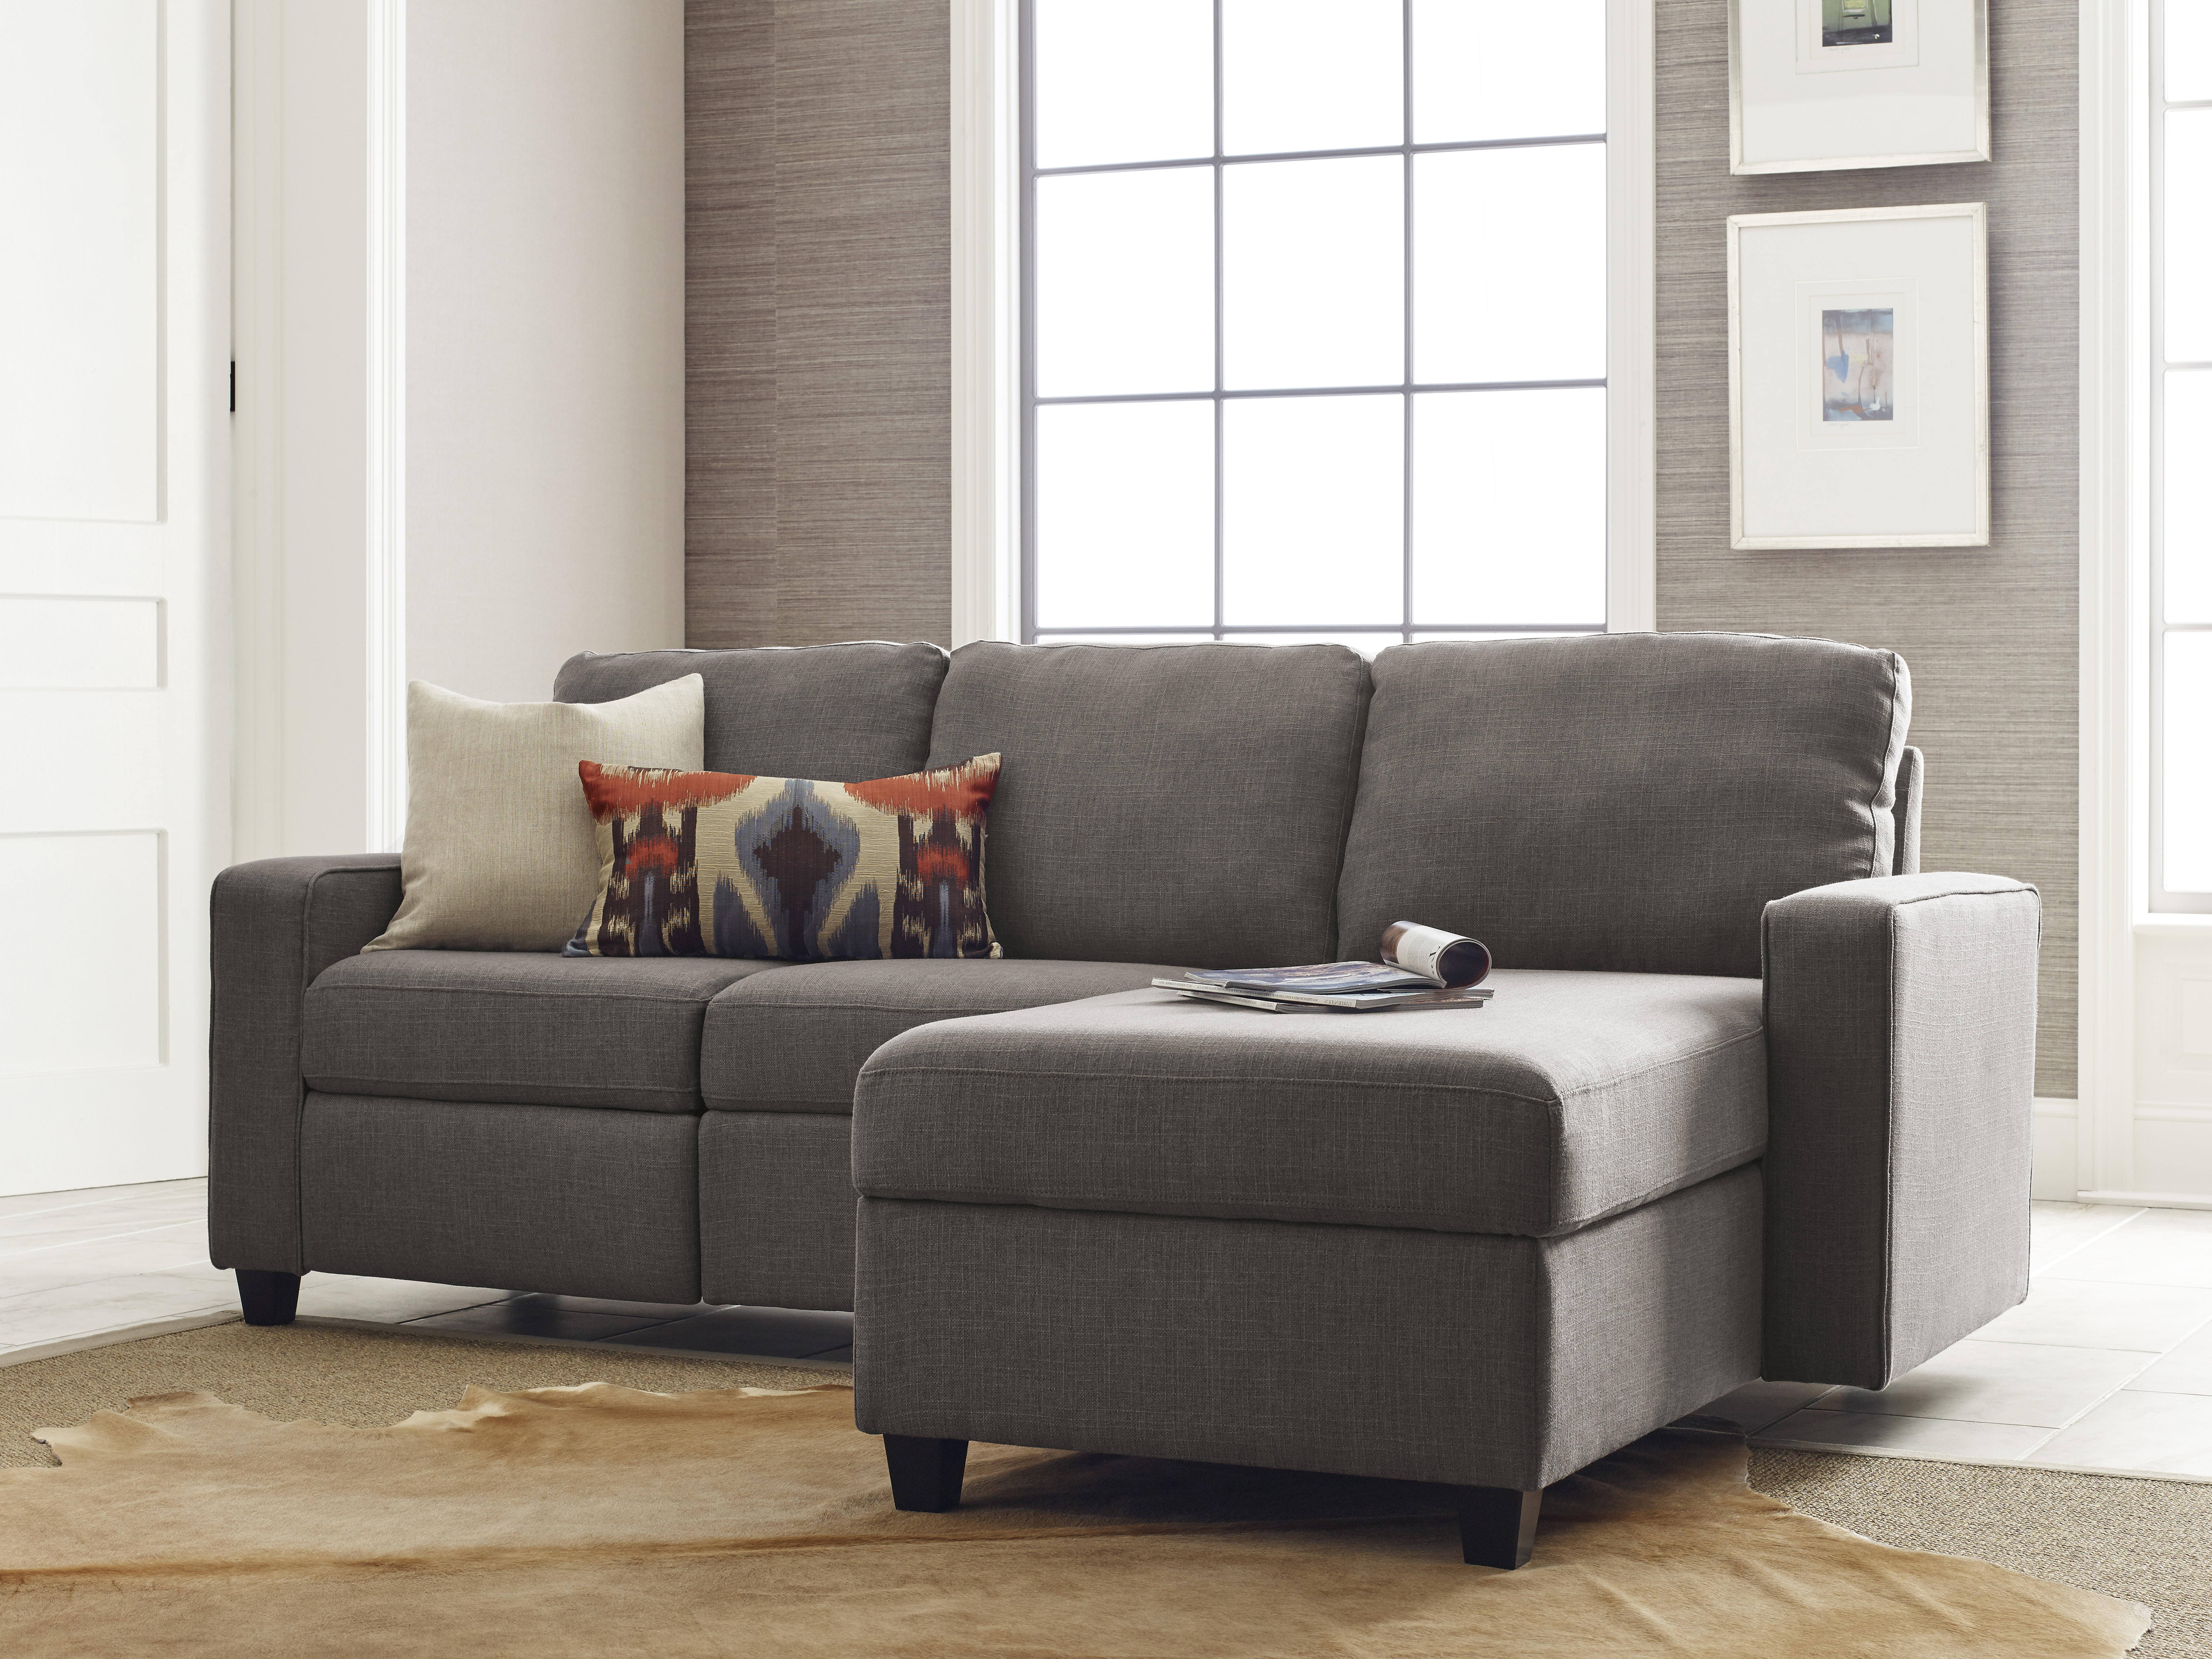 Serta Palisades Reclining Sectional with Right Storage Chaise - Gray - image 3 of 9